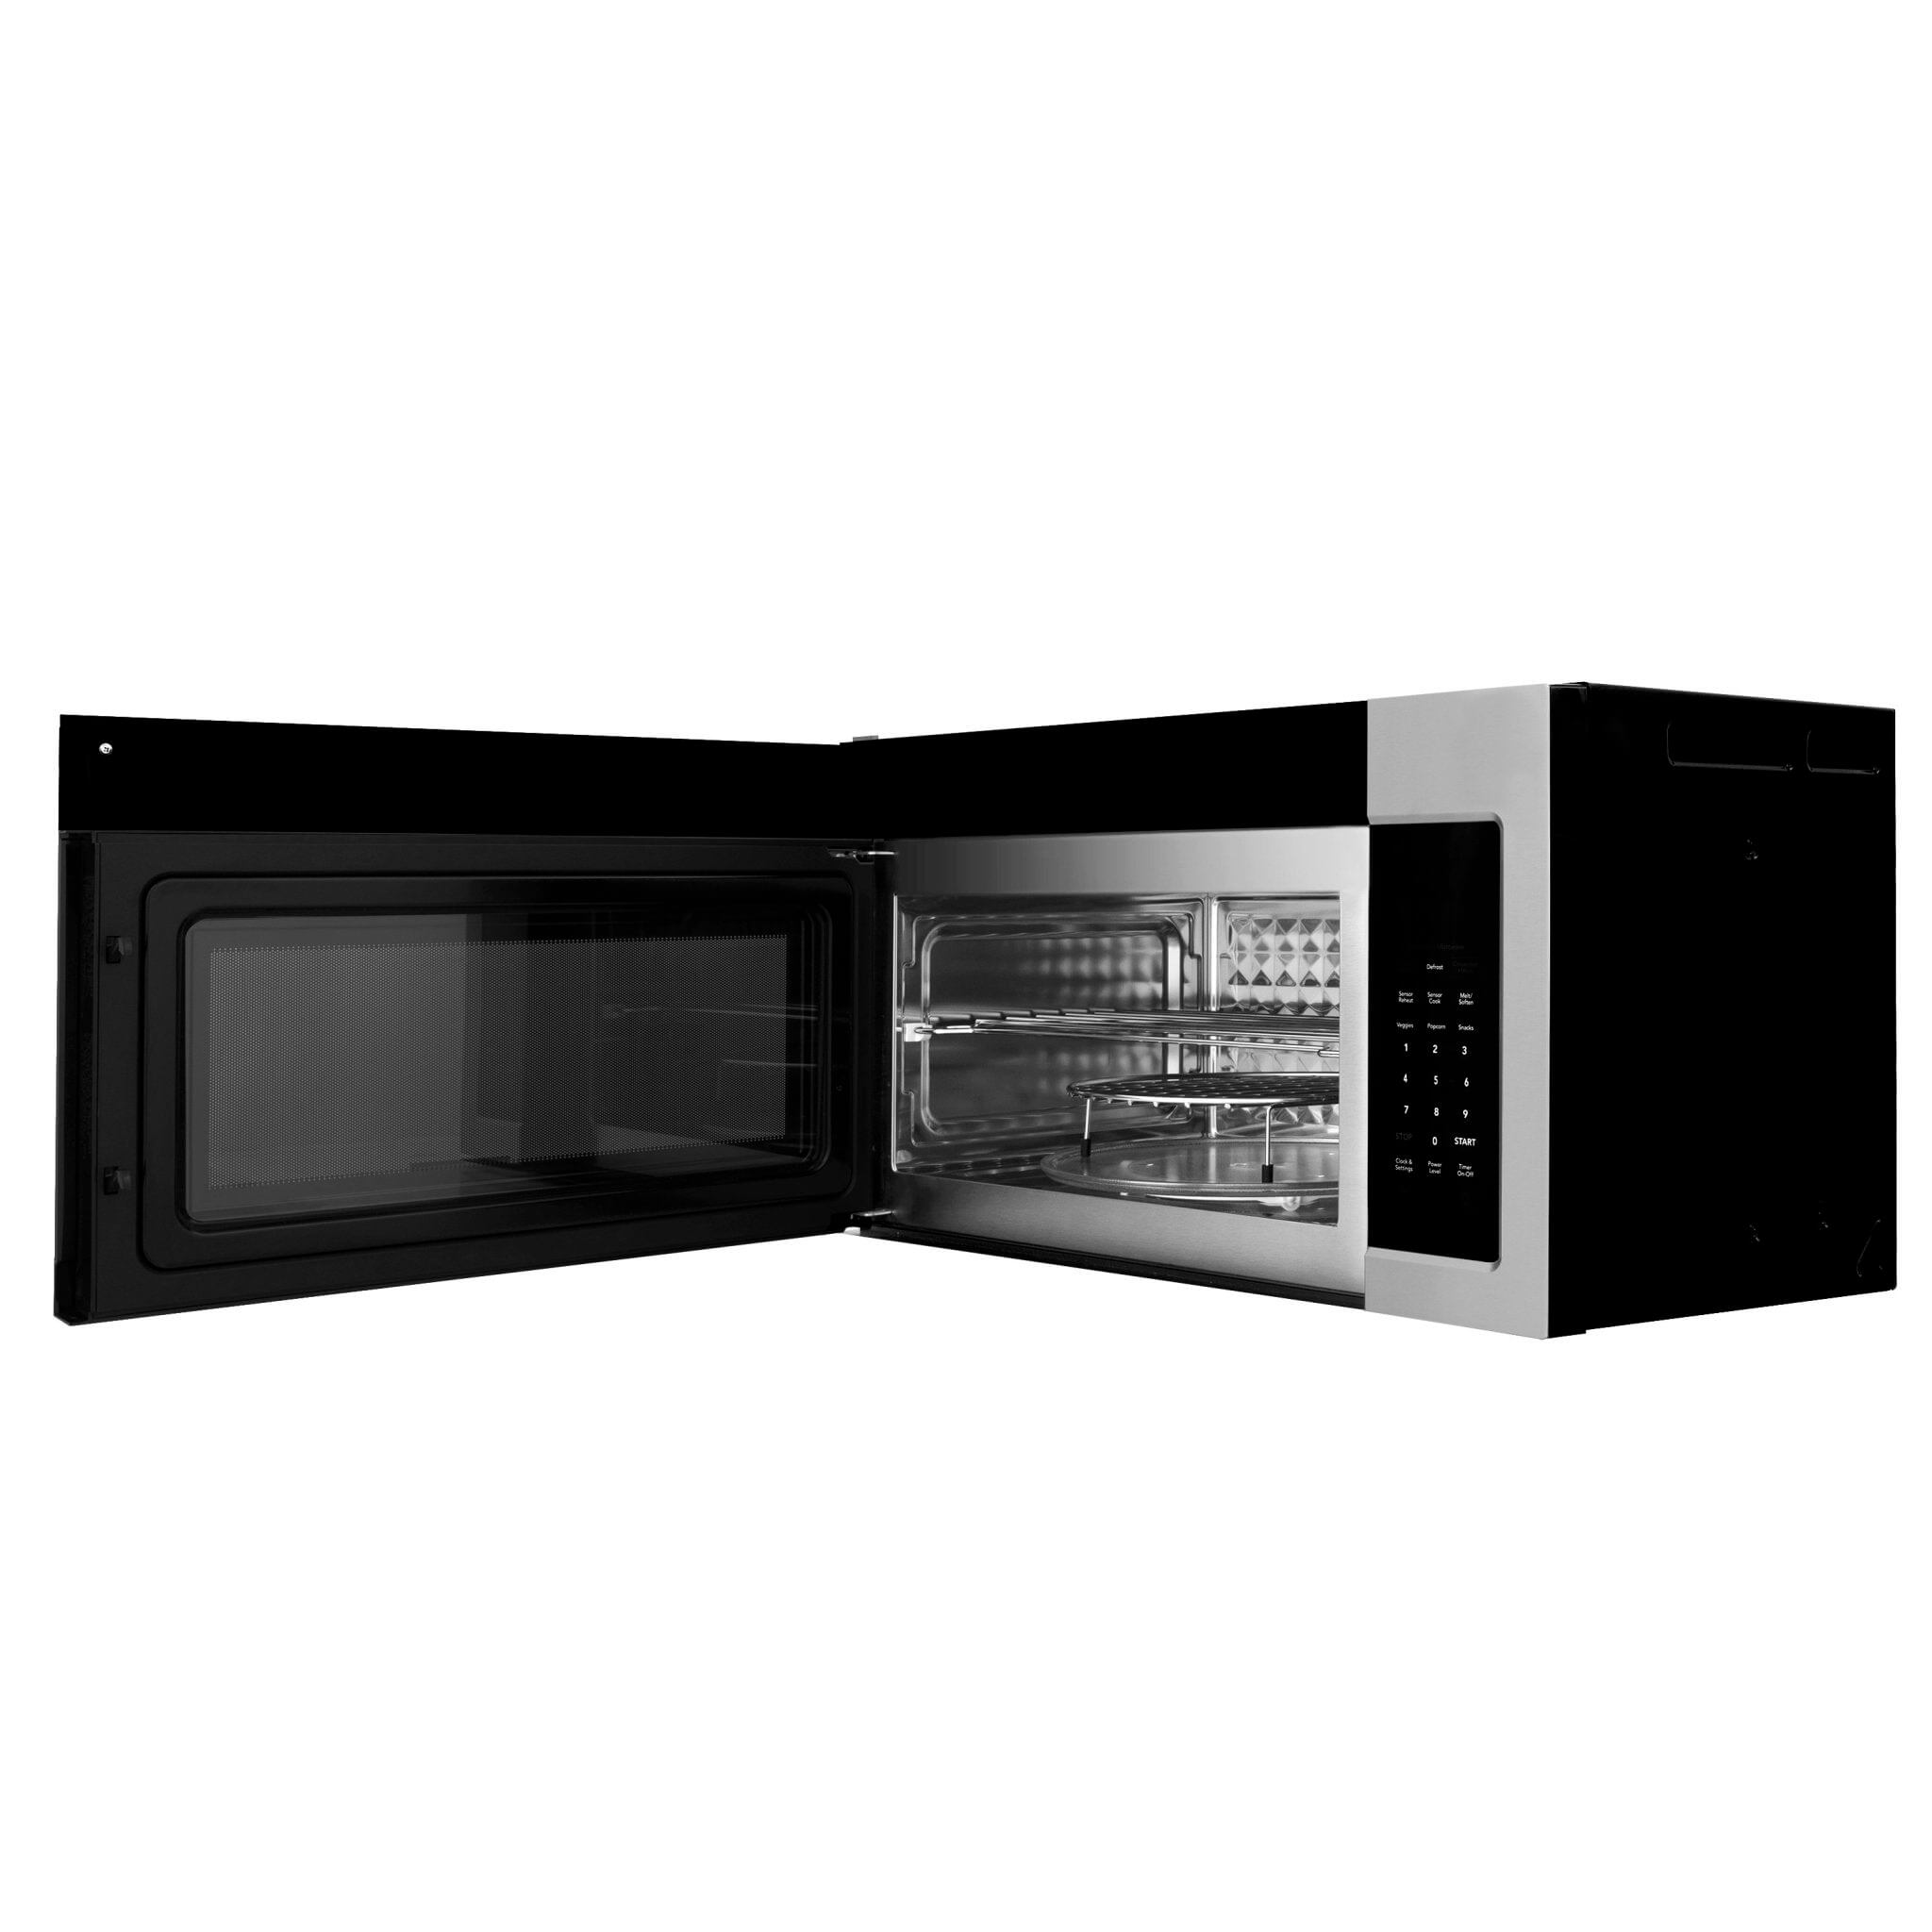 ZLINE 30 in. Stainless Steel Over the Range Convection Microwave Oven with Traditional Handle (MWO-OTR-H-30) Side View Door Open